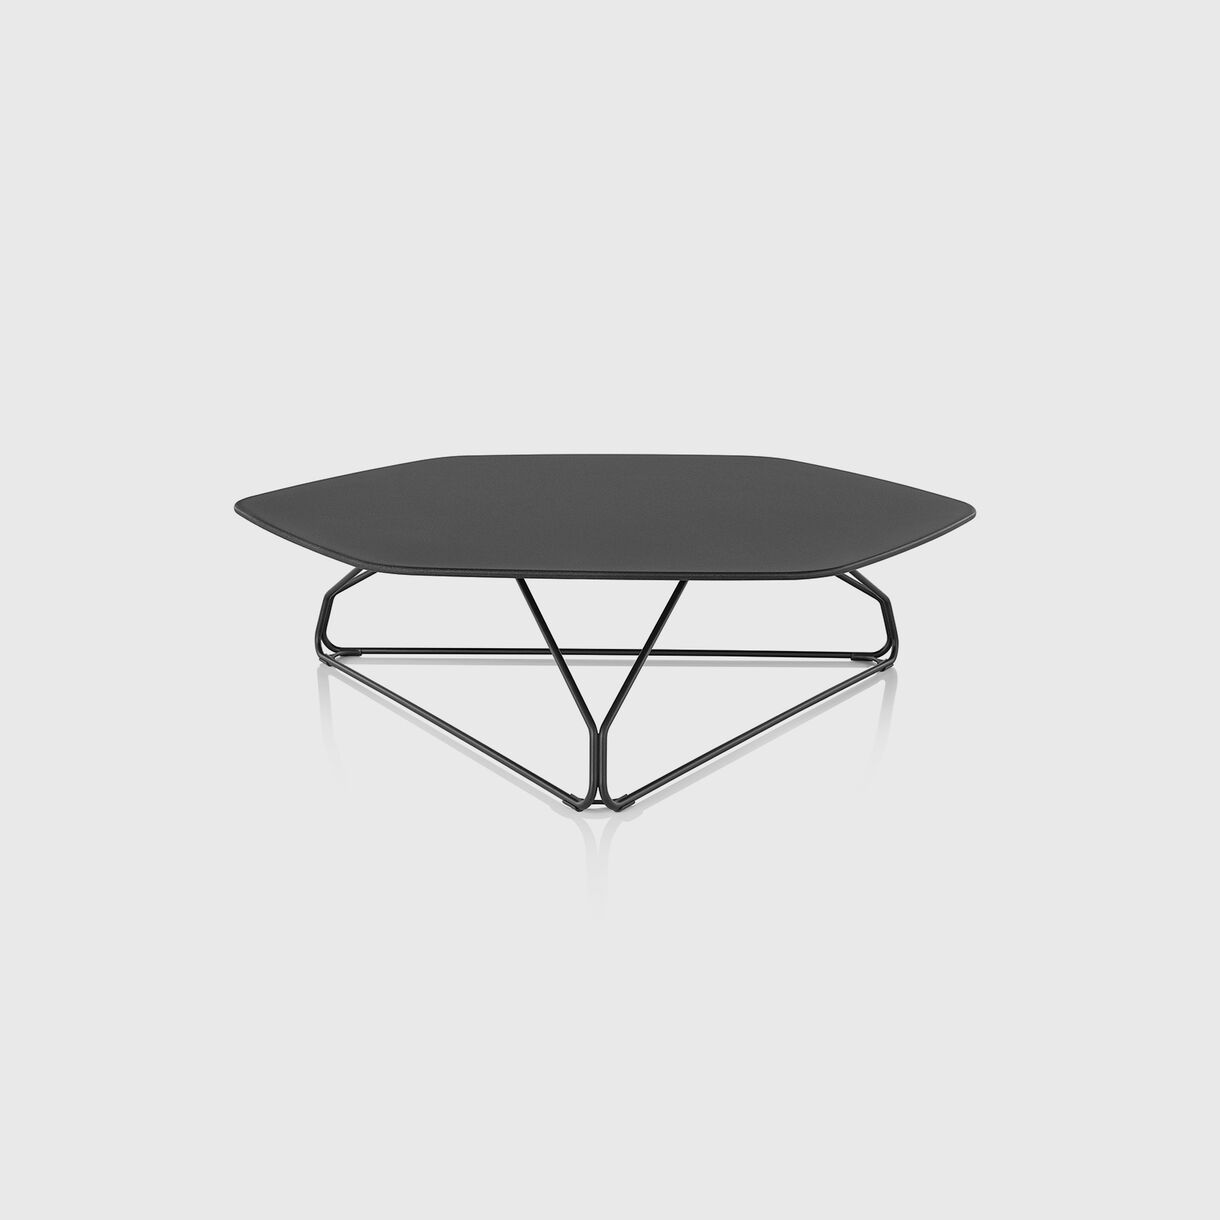 Polygon Wire Table, Low